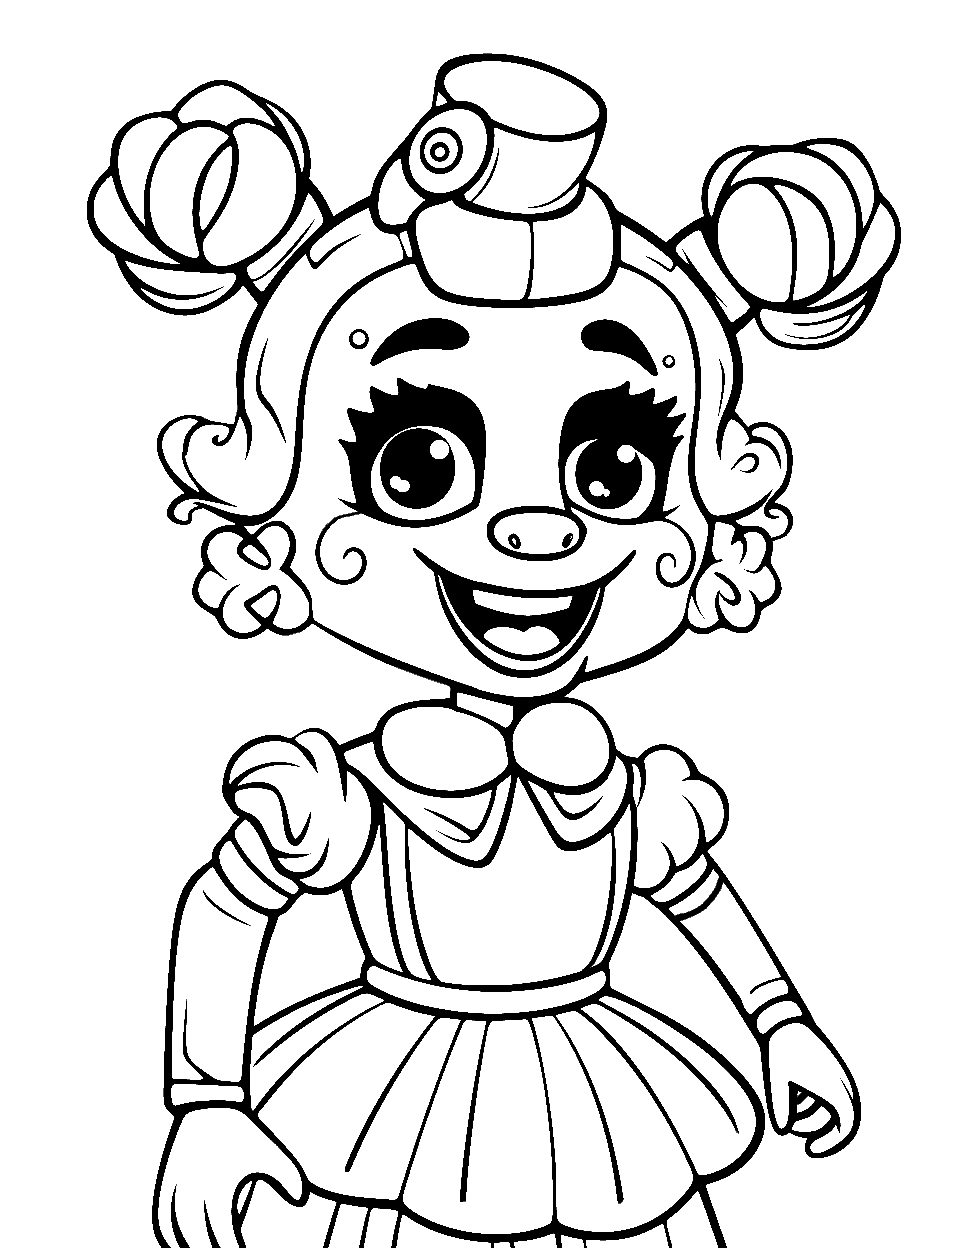 Free Coloring Pages To Print Five Nights At Freddys Coloring Pages